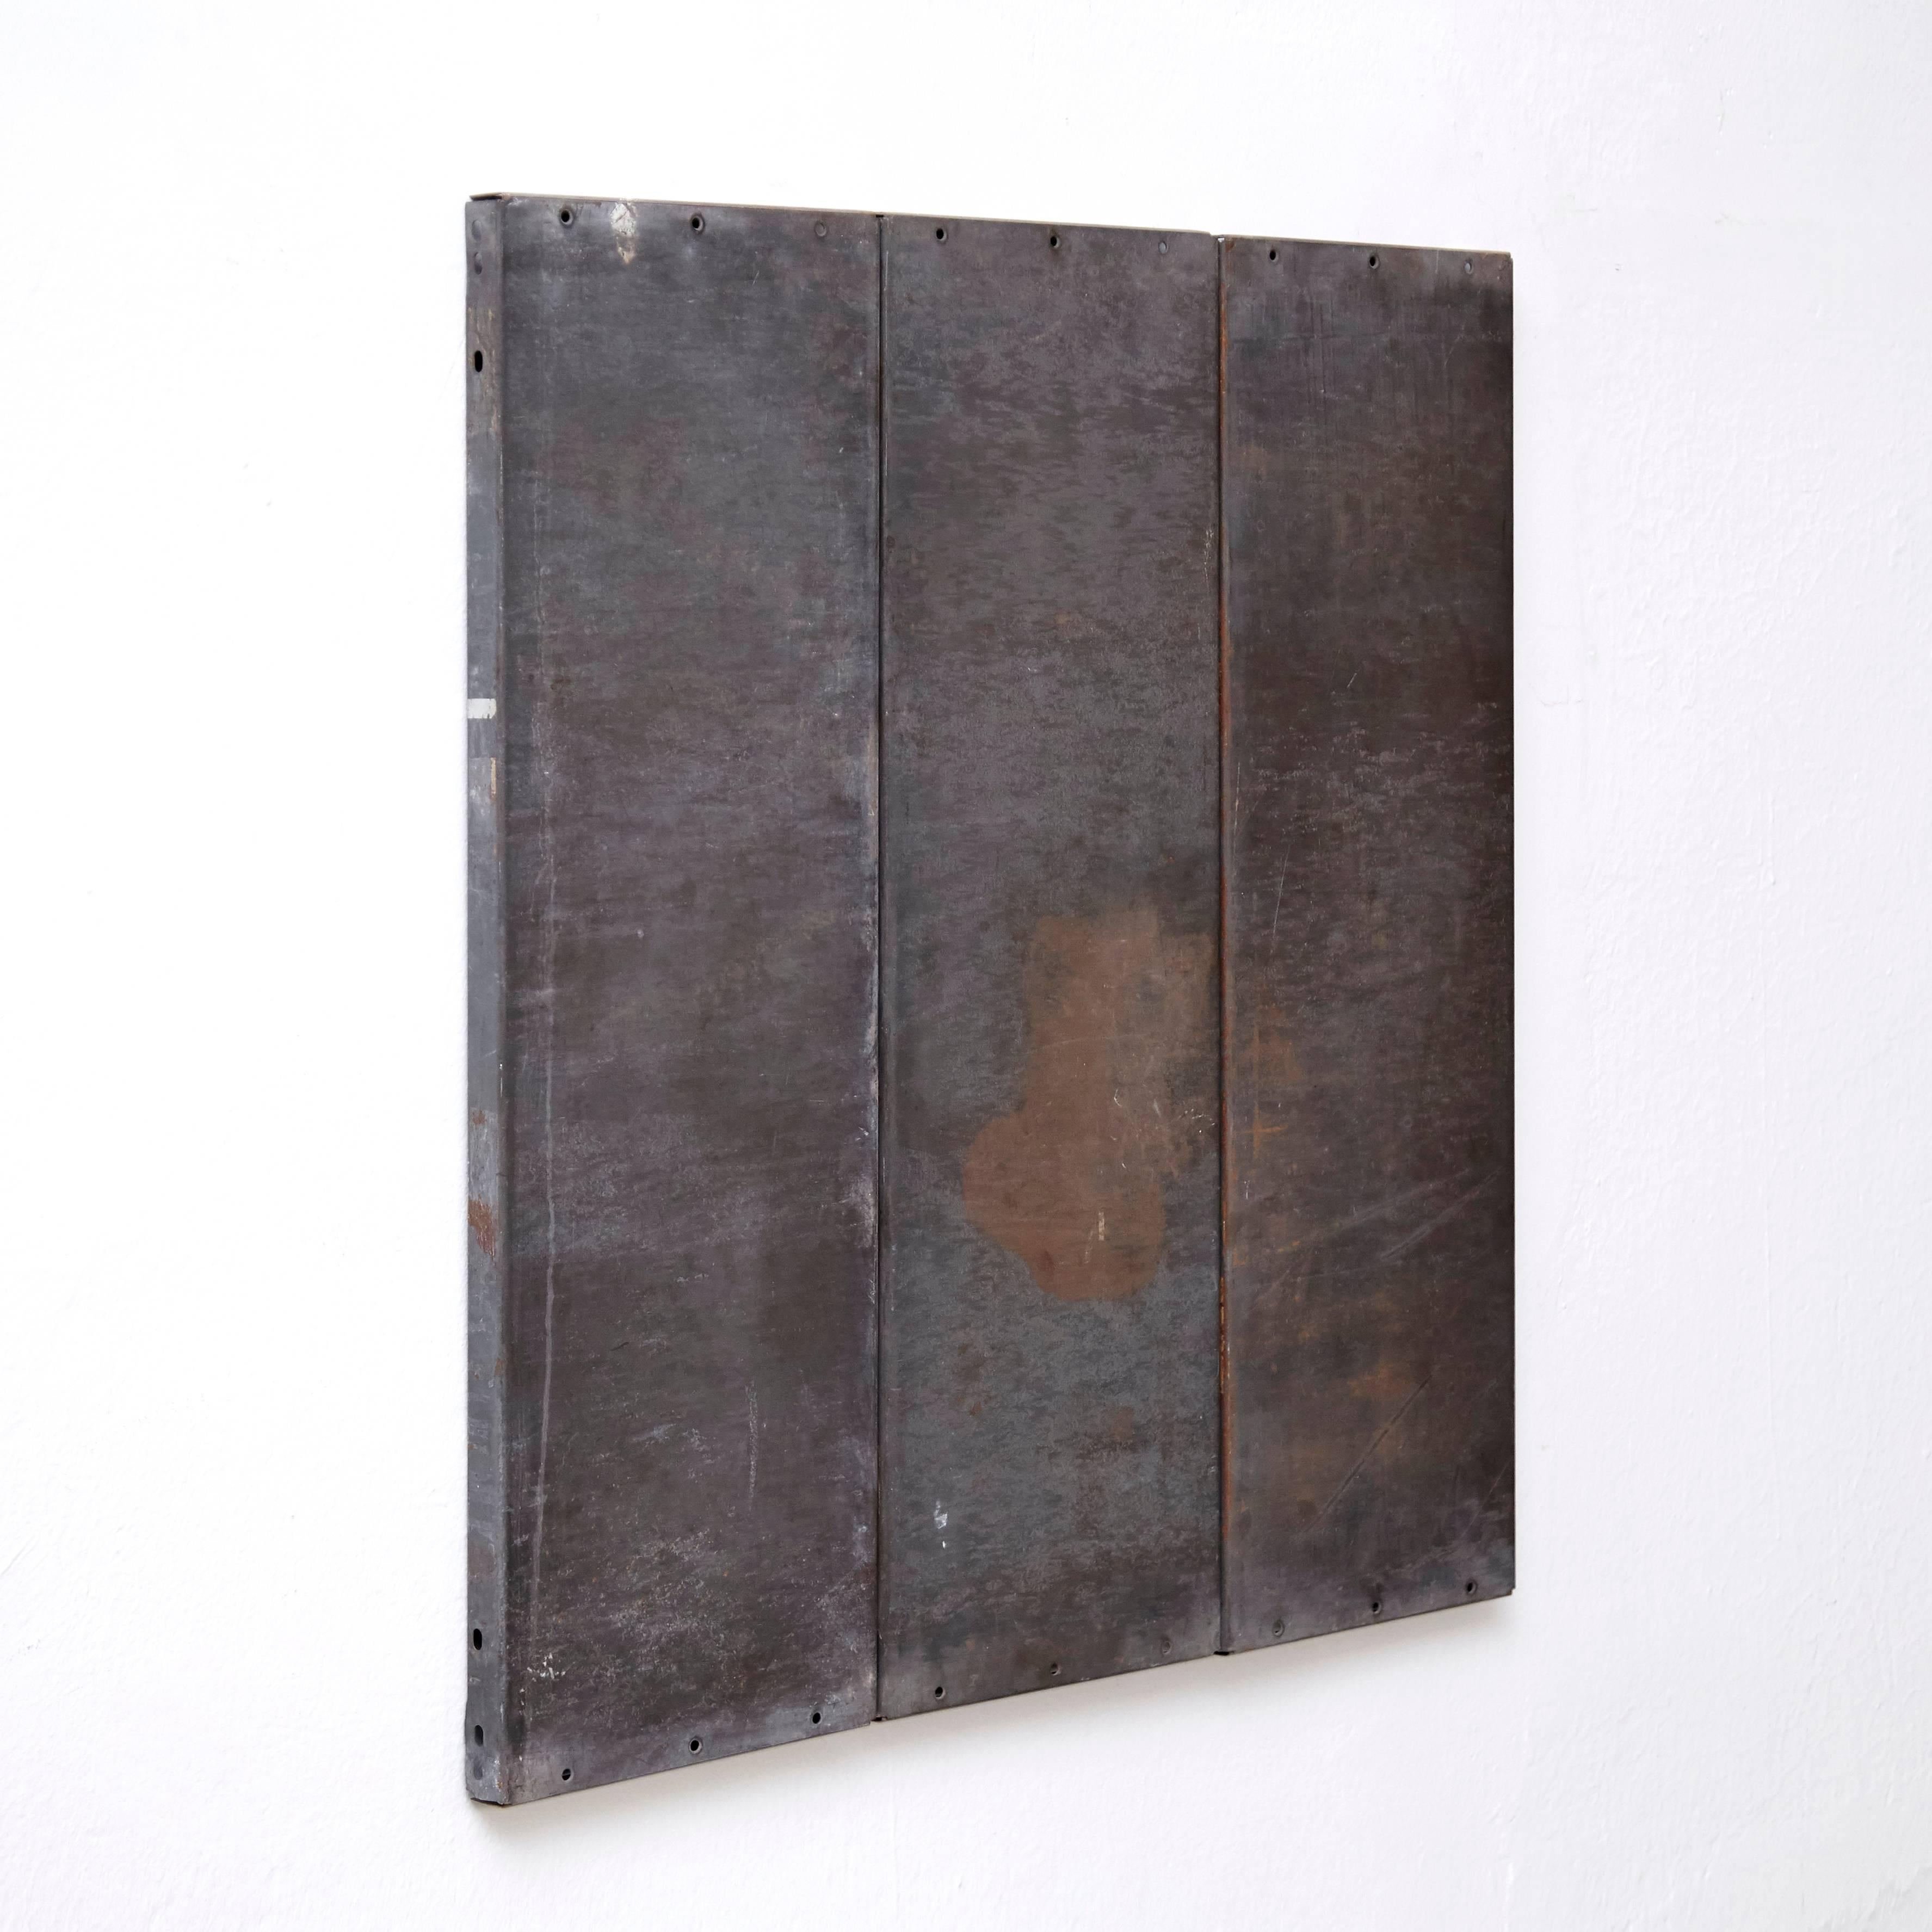 Ramon Horts, Minimalism artwork.

Structures of metal compositions made in Barcelona, circa 2017. For a solo Exhibition.
Signed by himself in engraving punch.

Stripping metal, rusted and varnished.

In original conditions.

    